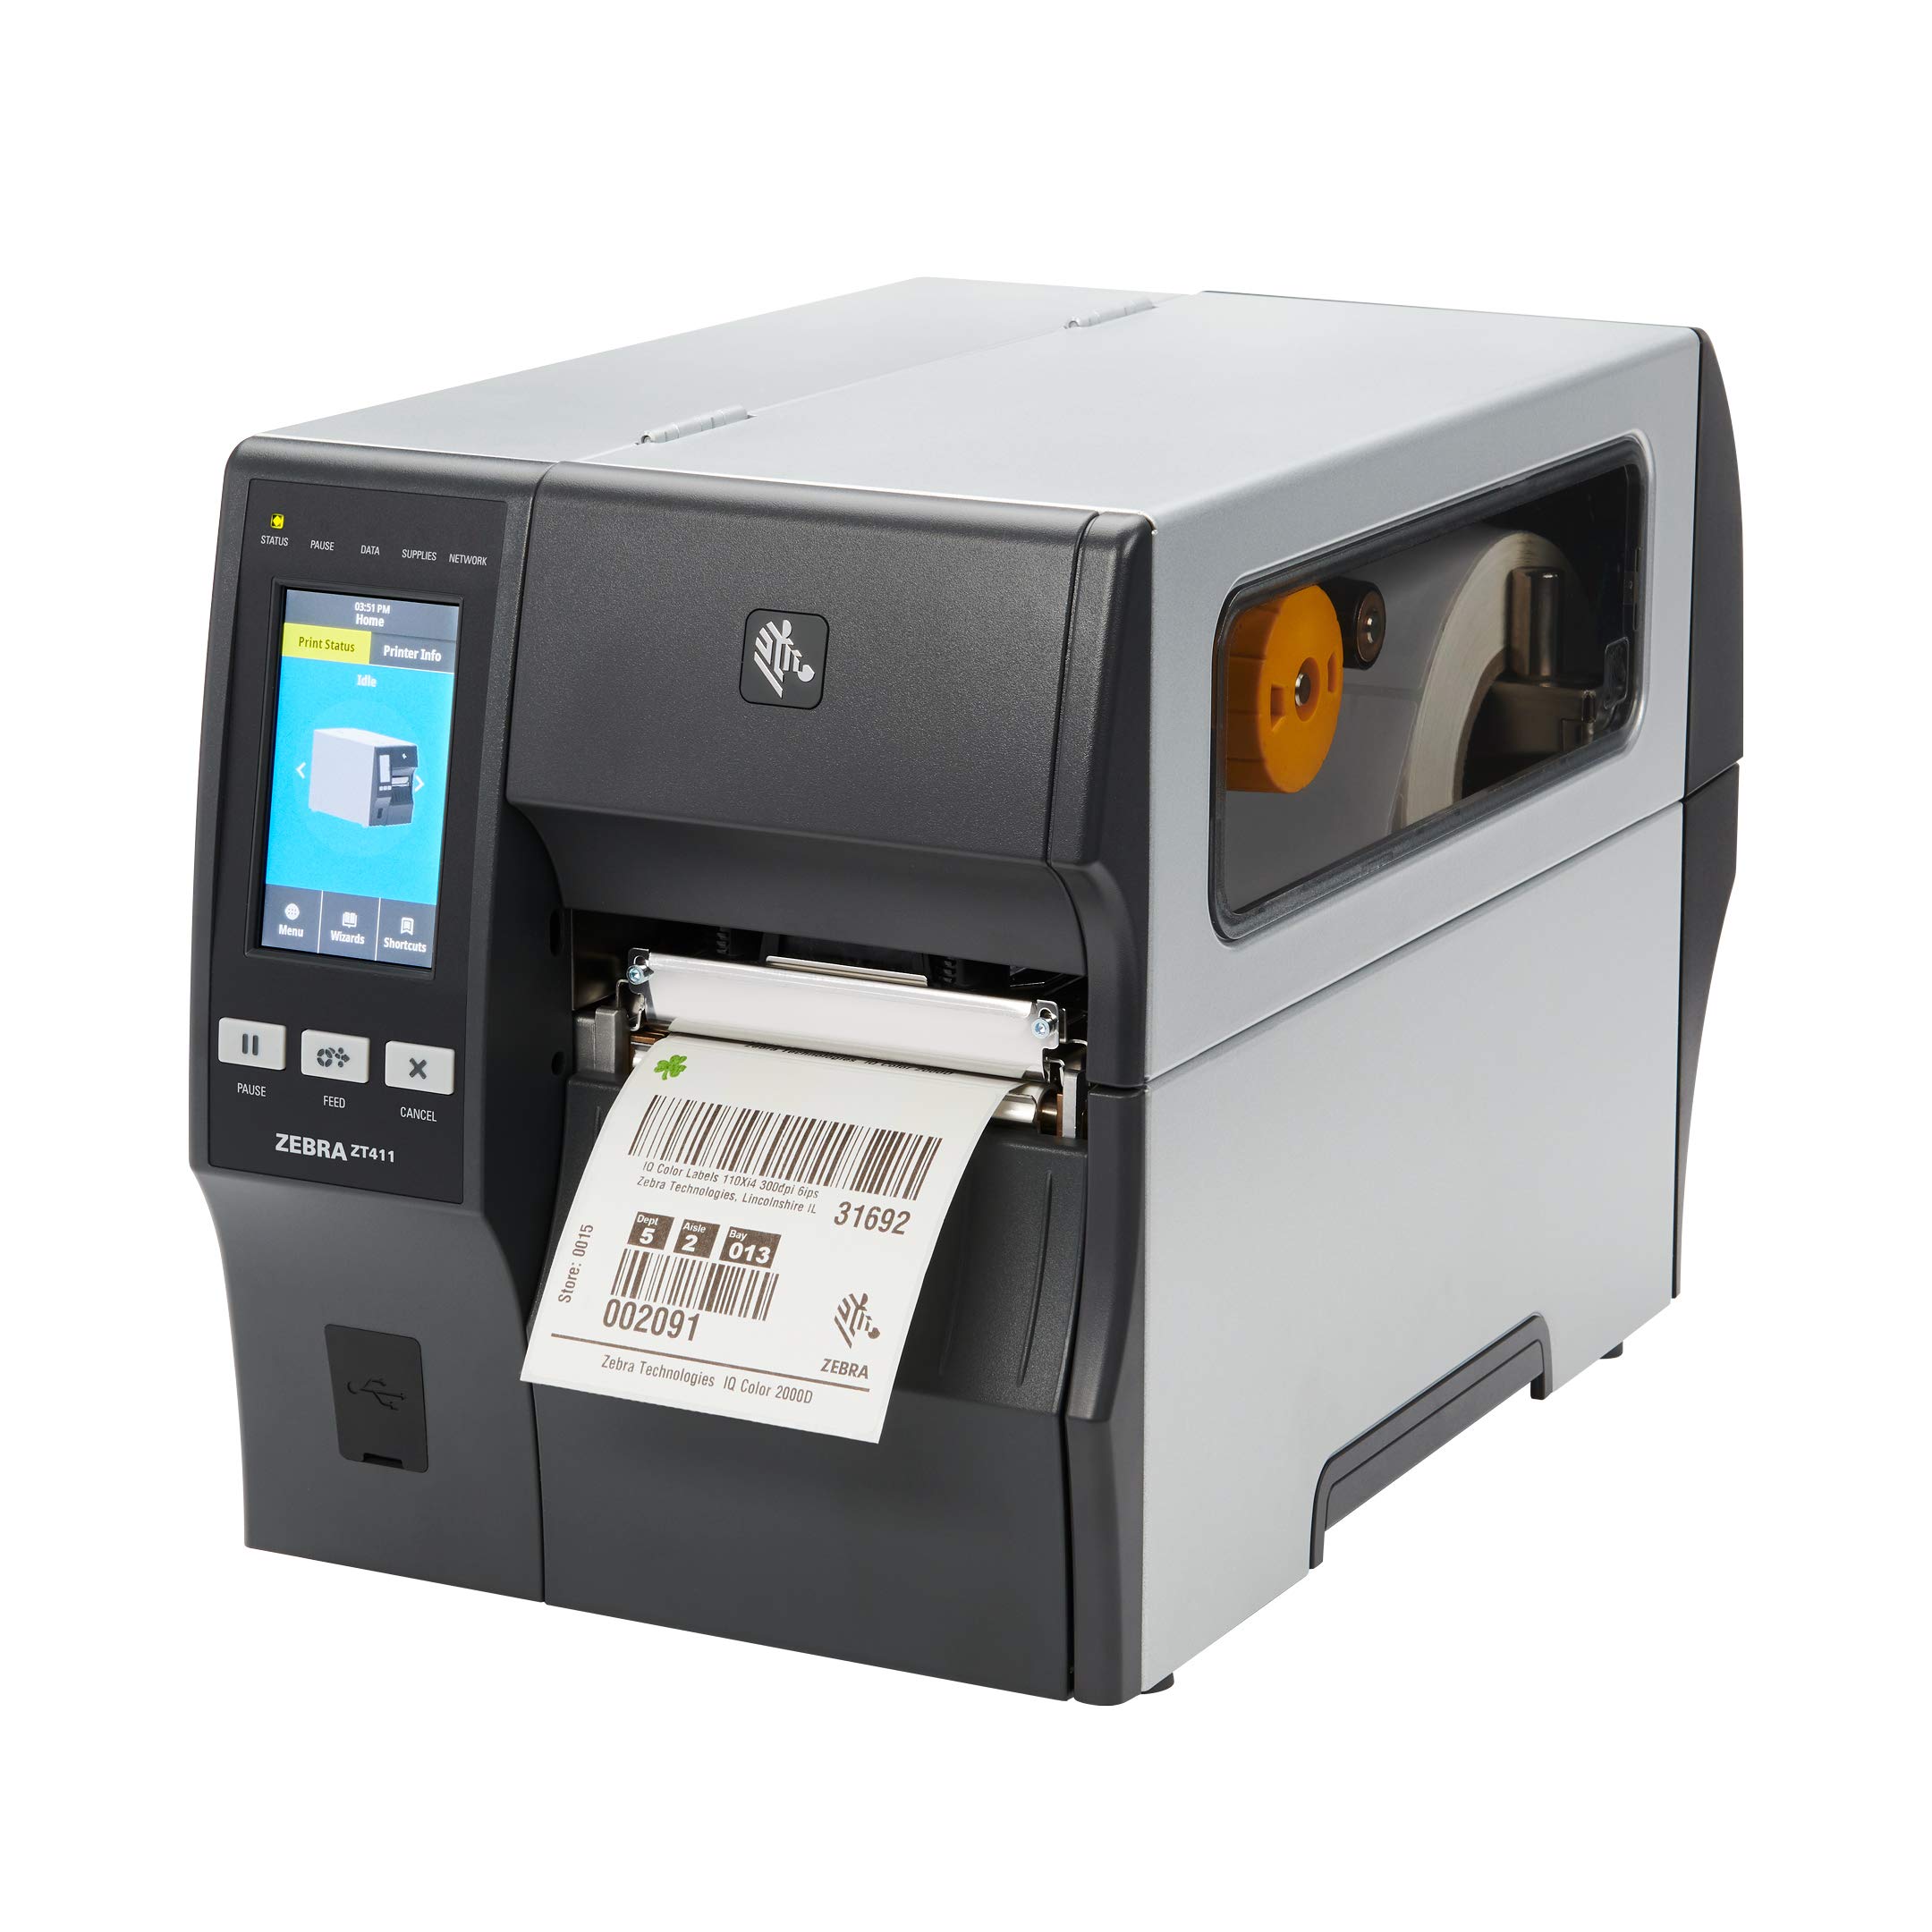 ZEBRA ZT411 Thermal Transfer Industrial Printer 203 dpi Print Width 4 Inches Features Serial, USB, Ethernet, and Bluetooth Connecting Options ZT41142-T010000Z